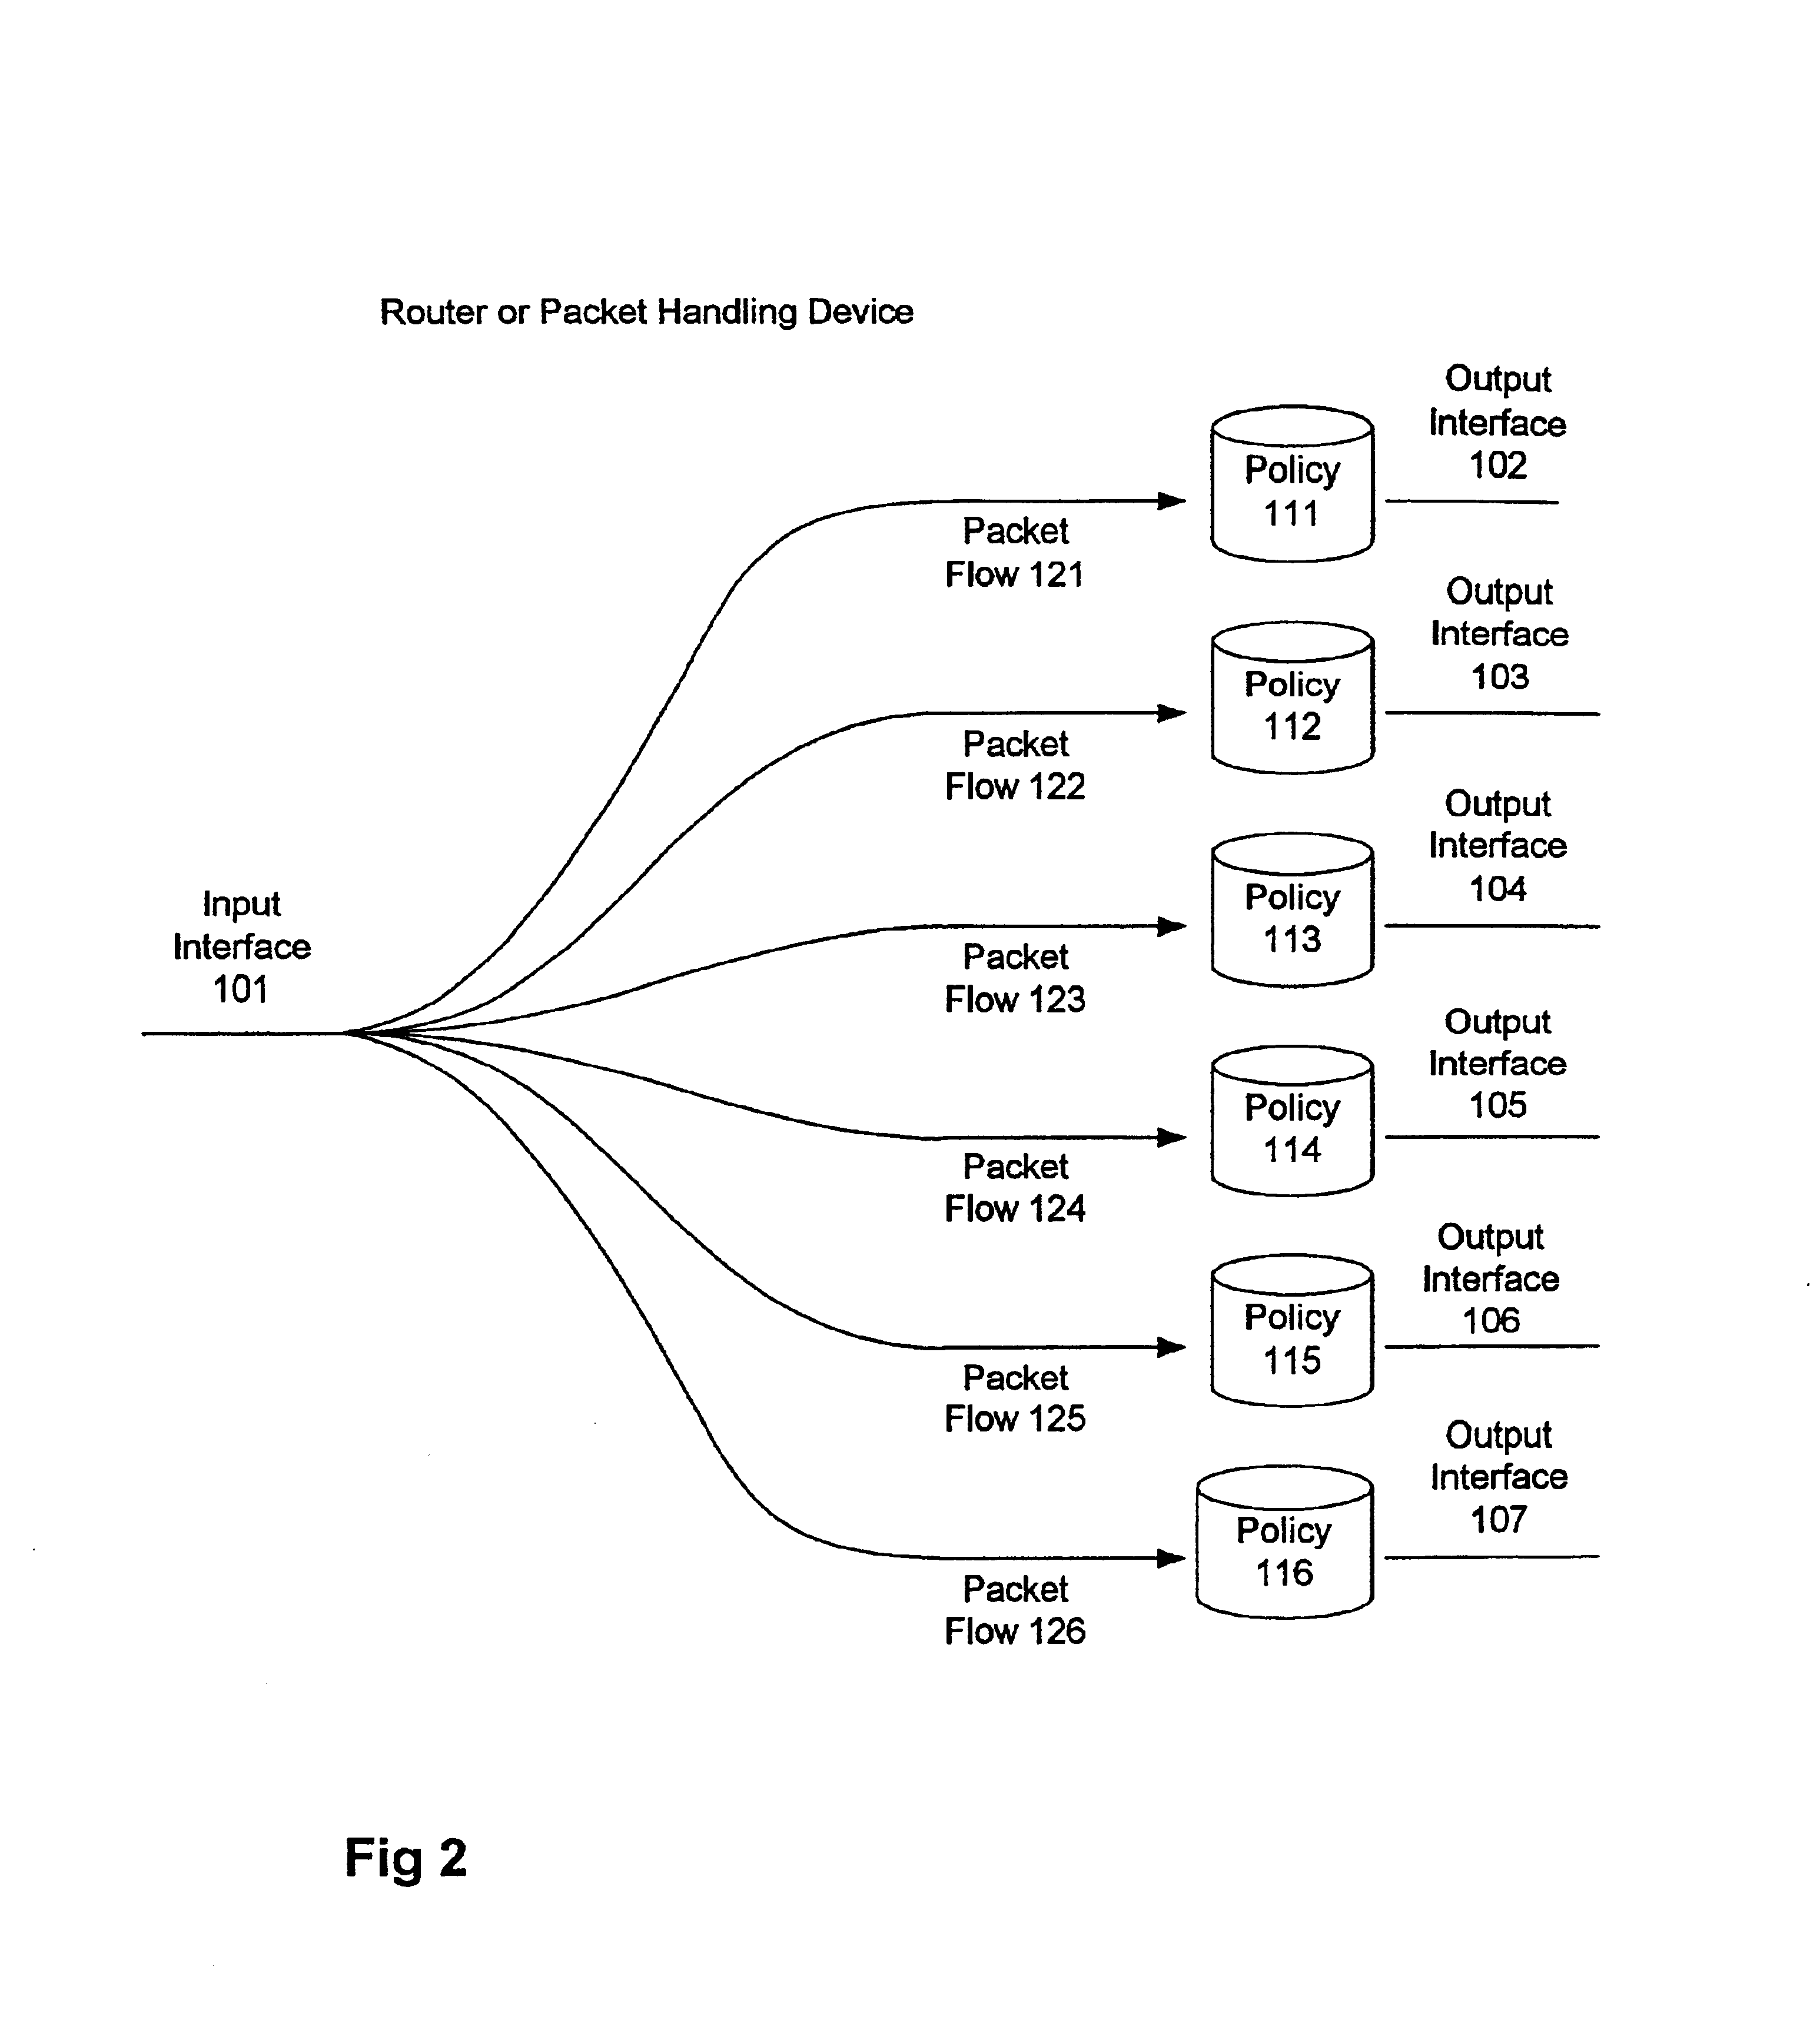 Method and apparatus for the enumeration of sets of concurrently scheduled events